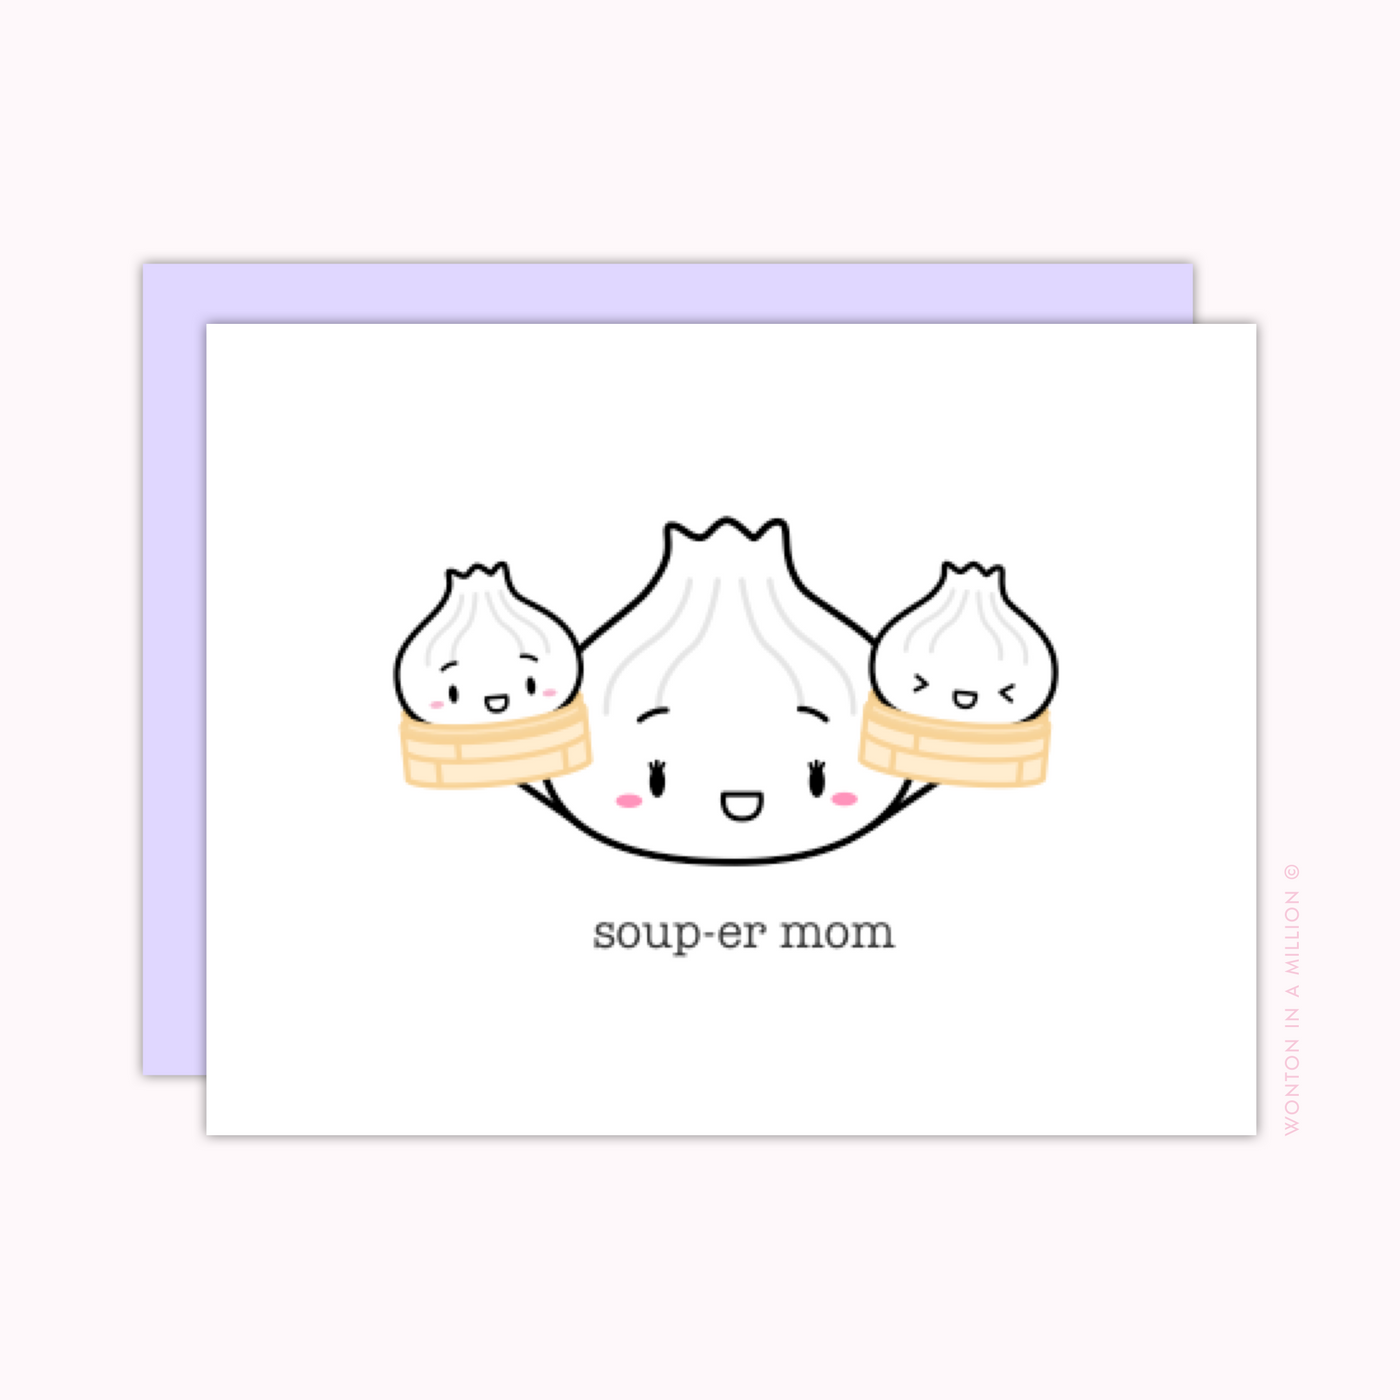 "Soup-er Mom" Duo Greeting Card (A2)